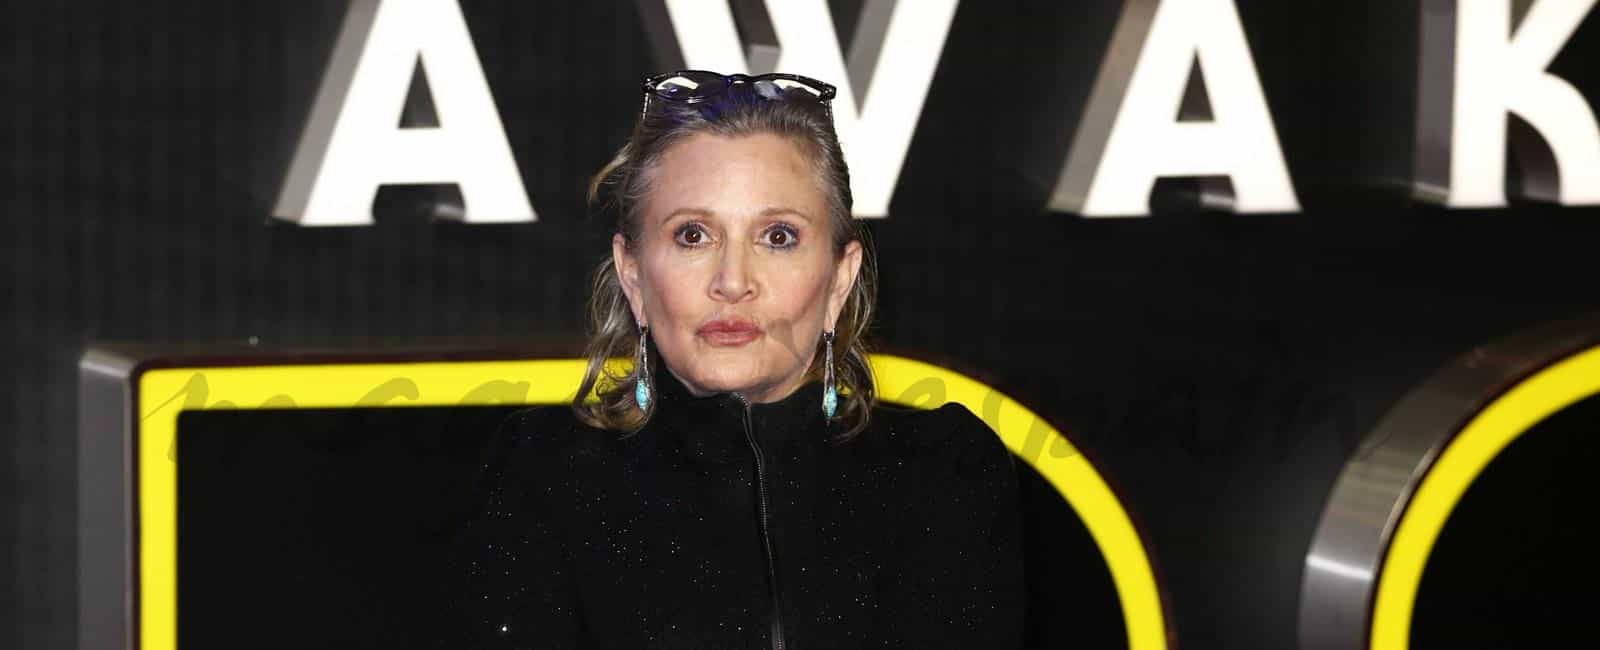 carrie fisher sufre un infarto